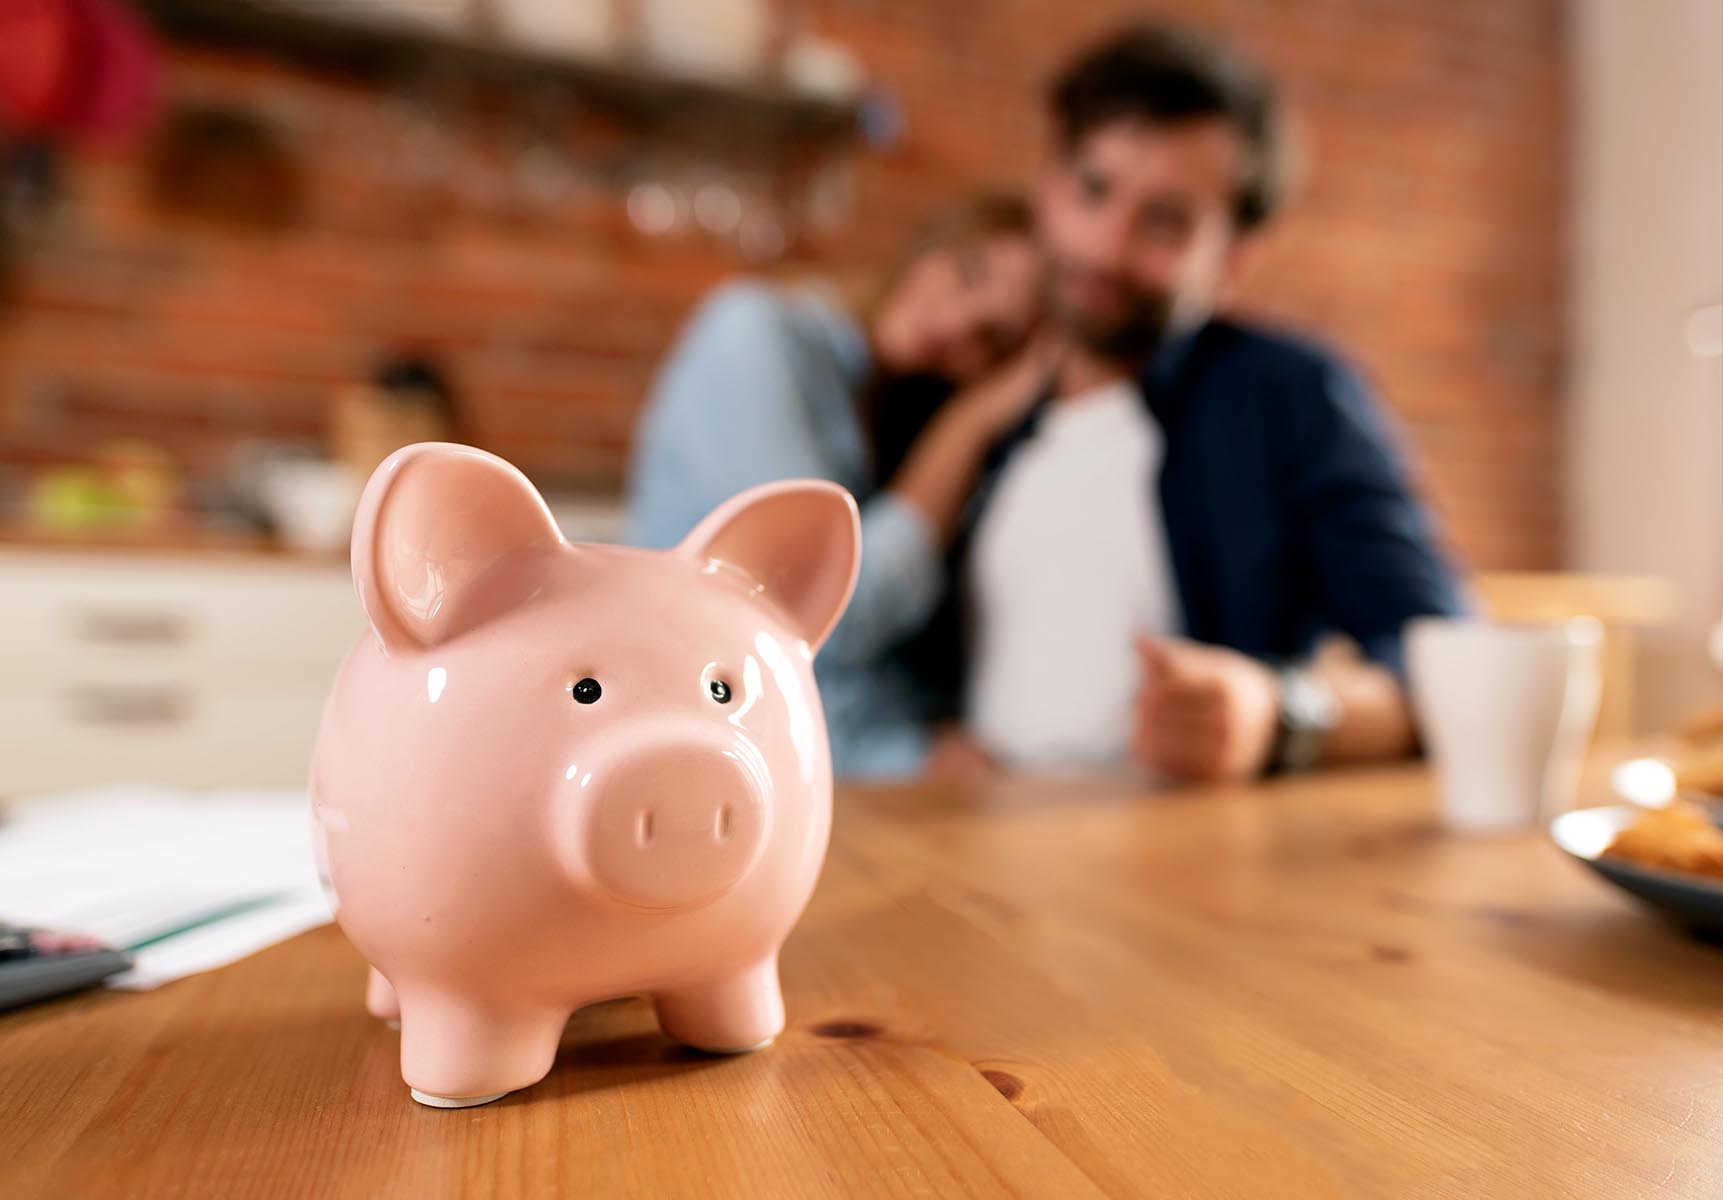 learn how you and your spouse can save money together